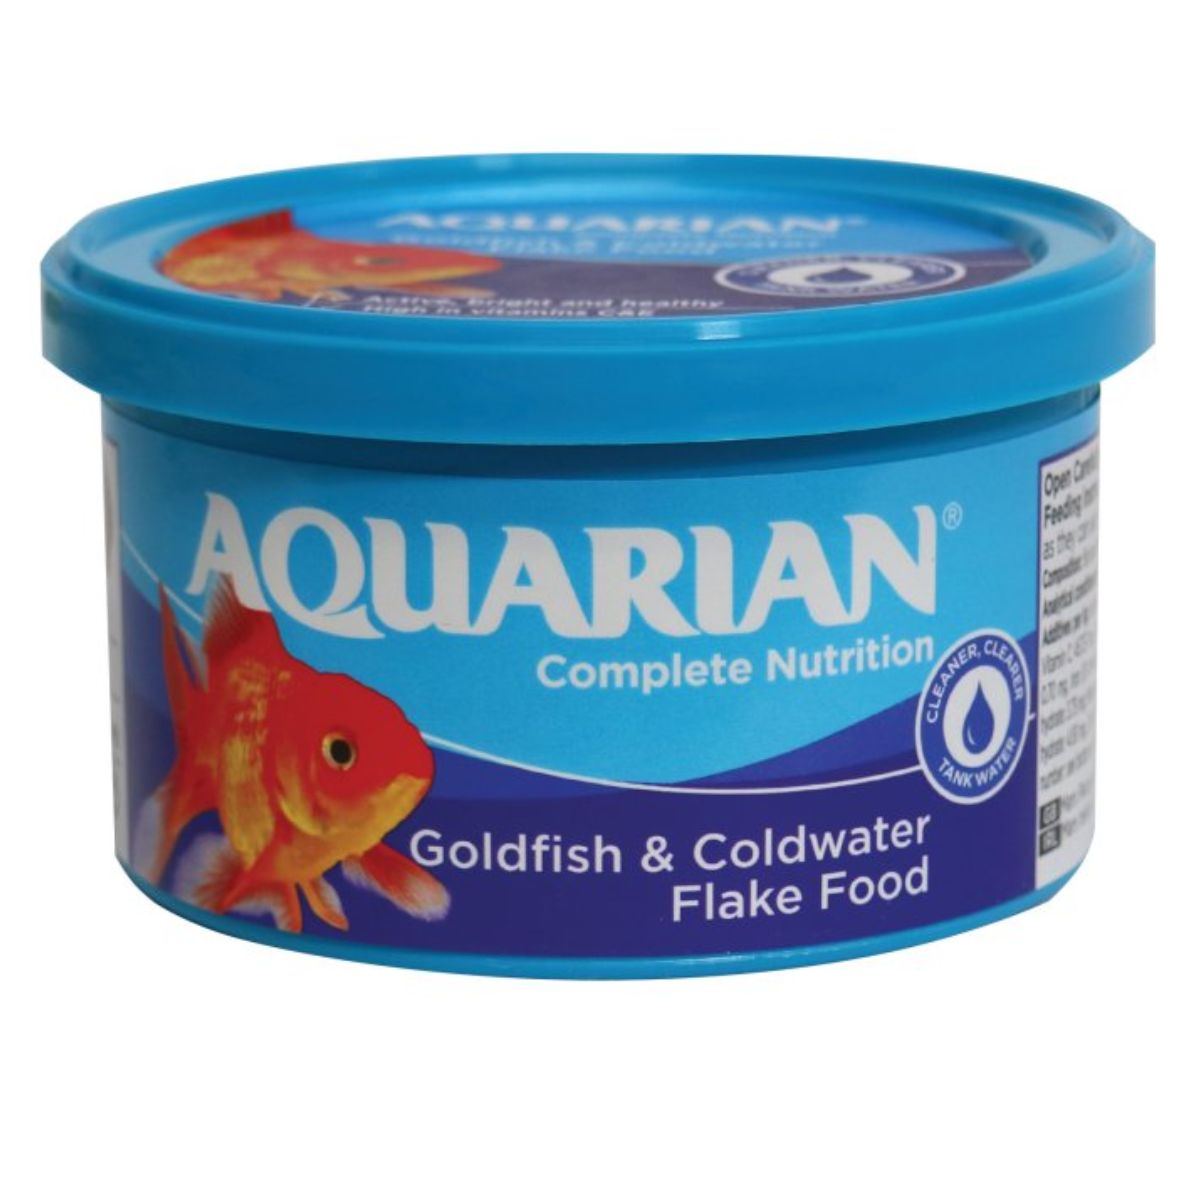 Container of Aquarian Goldfish Food Flakes with a blue lid, featuring an image of a goldfish on the label.